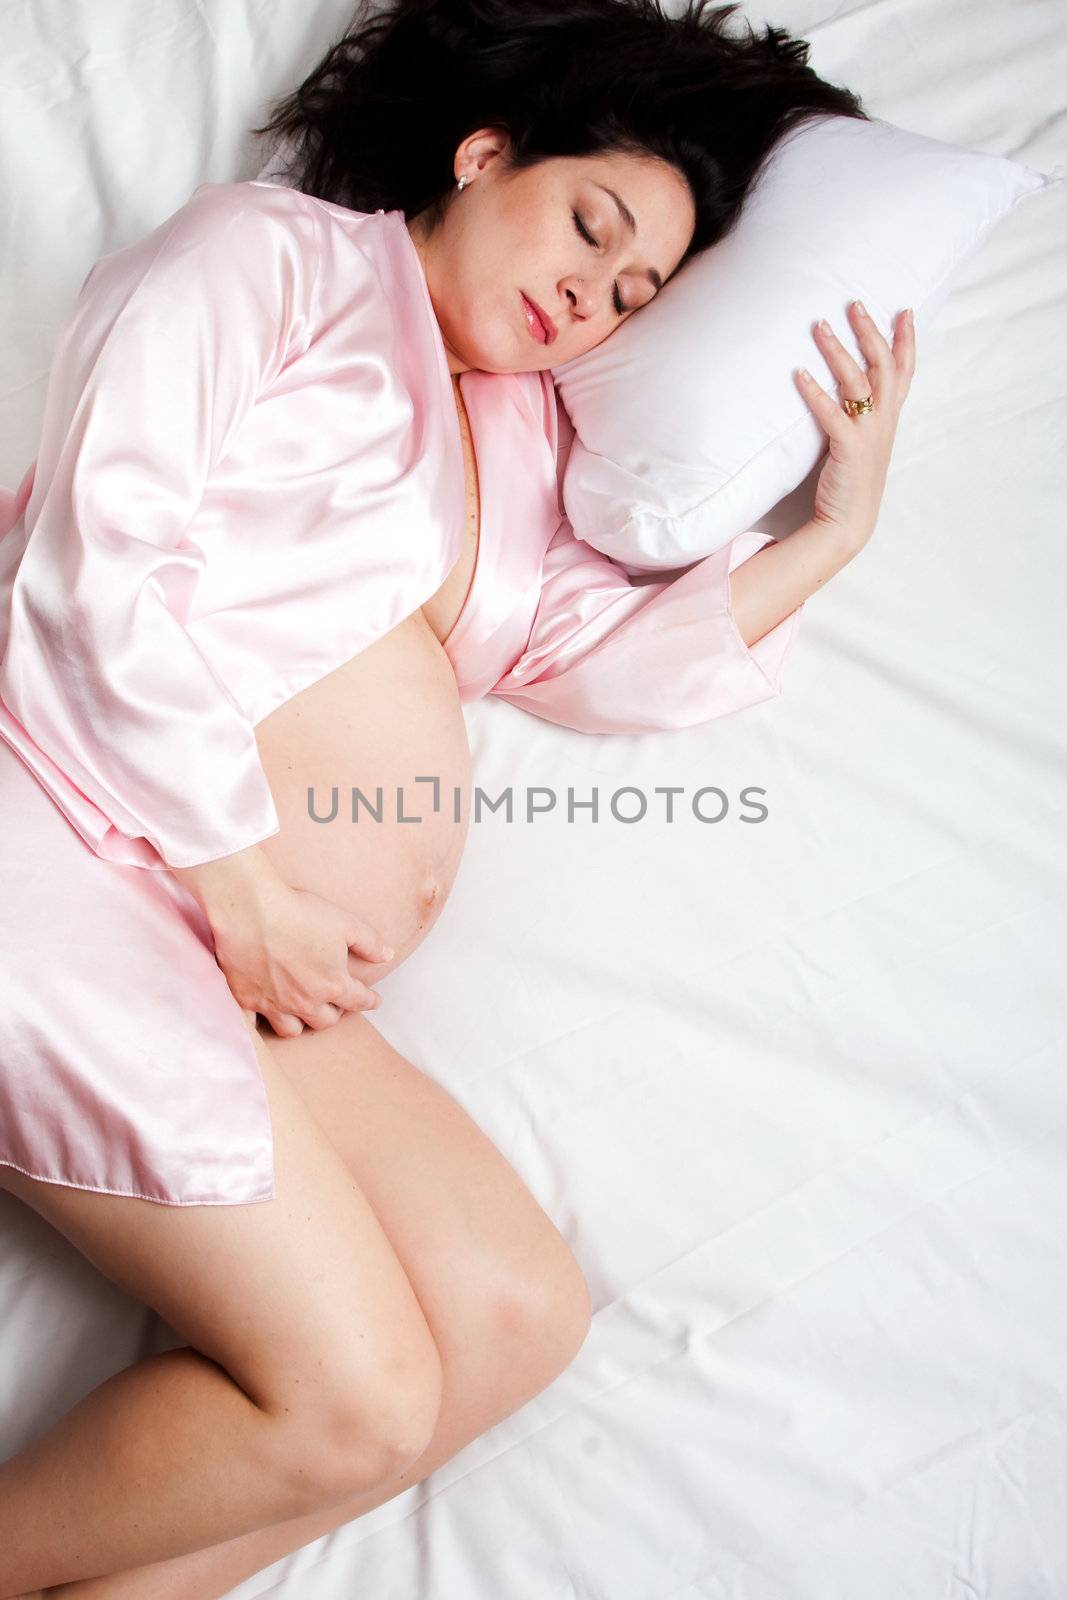 Sleeping pregnant woman in bed by phakimata